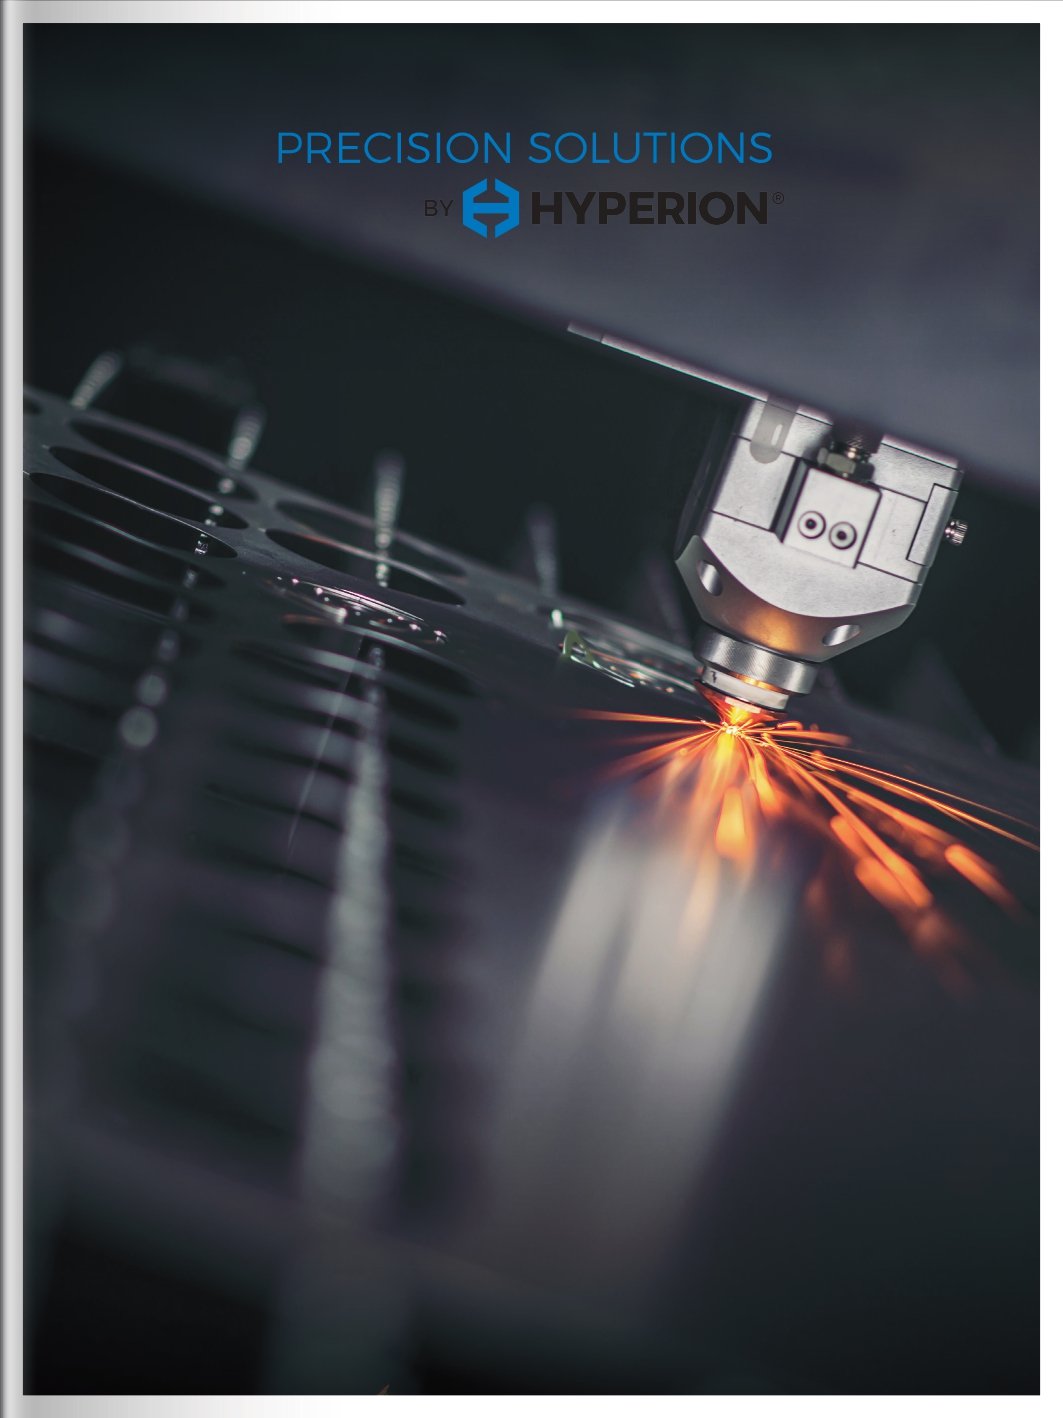 Precision Solutions by Hyperion™: The Hard Line